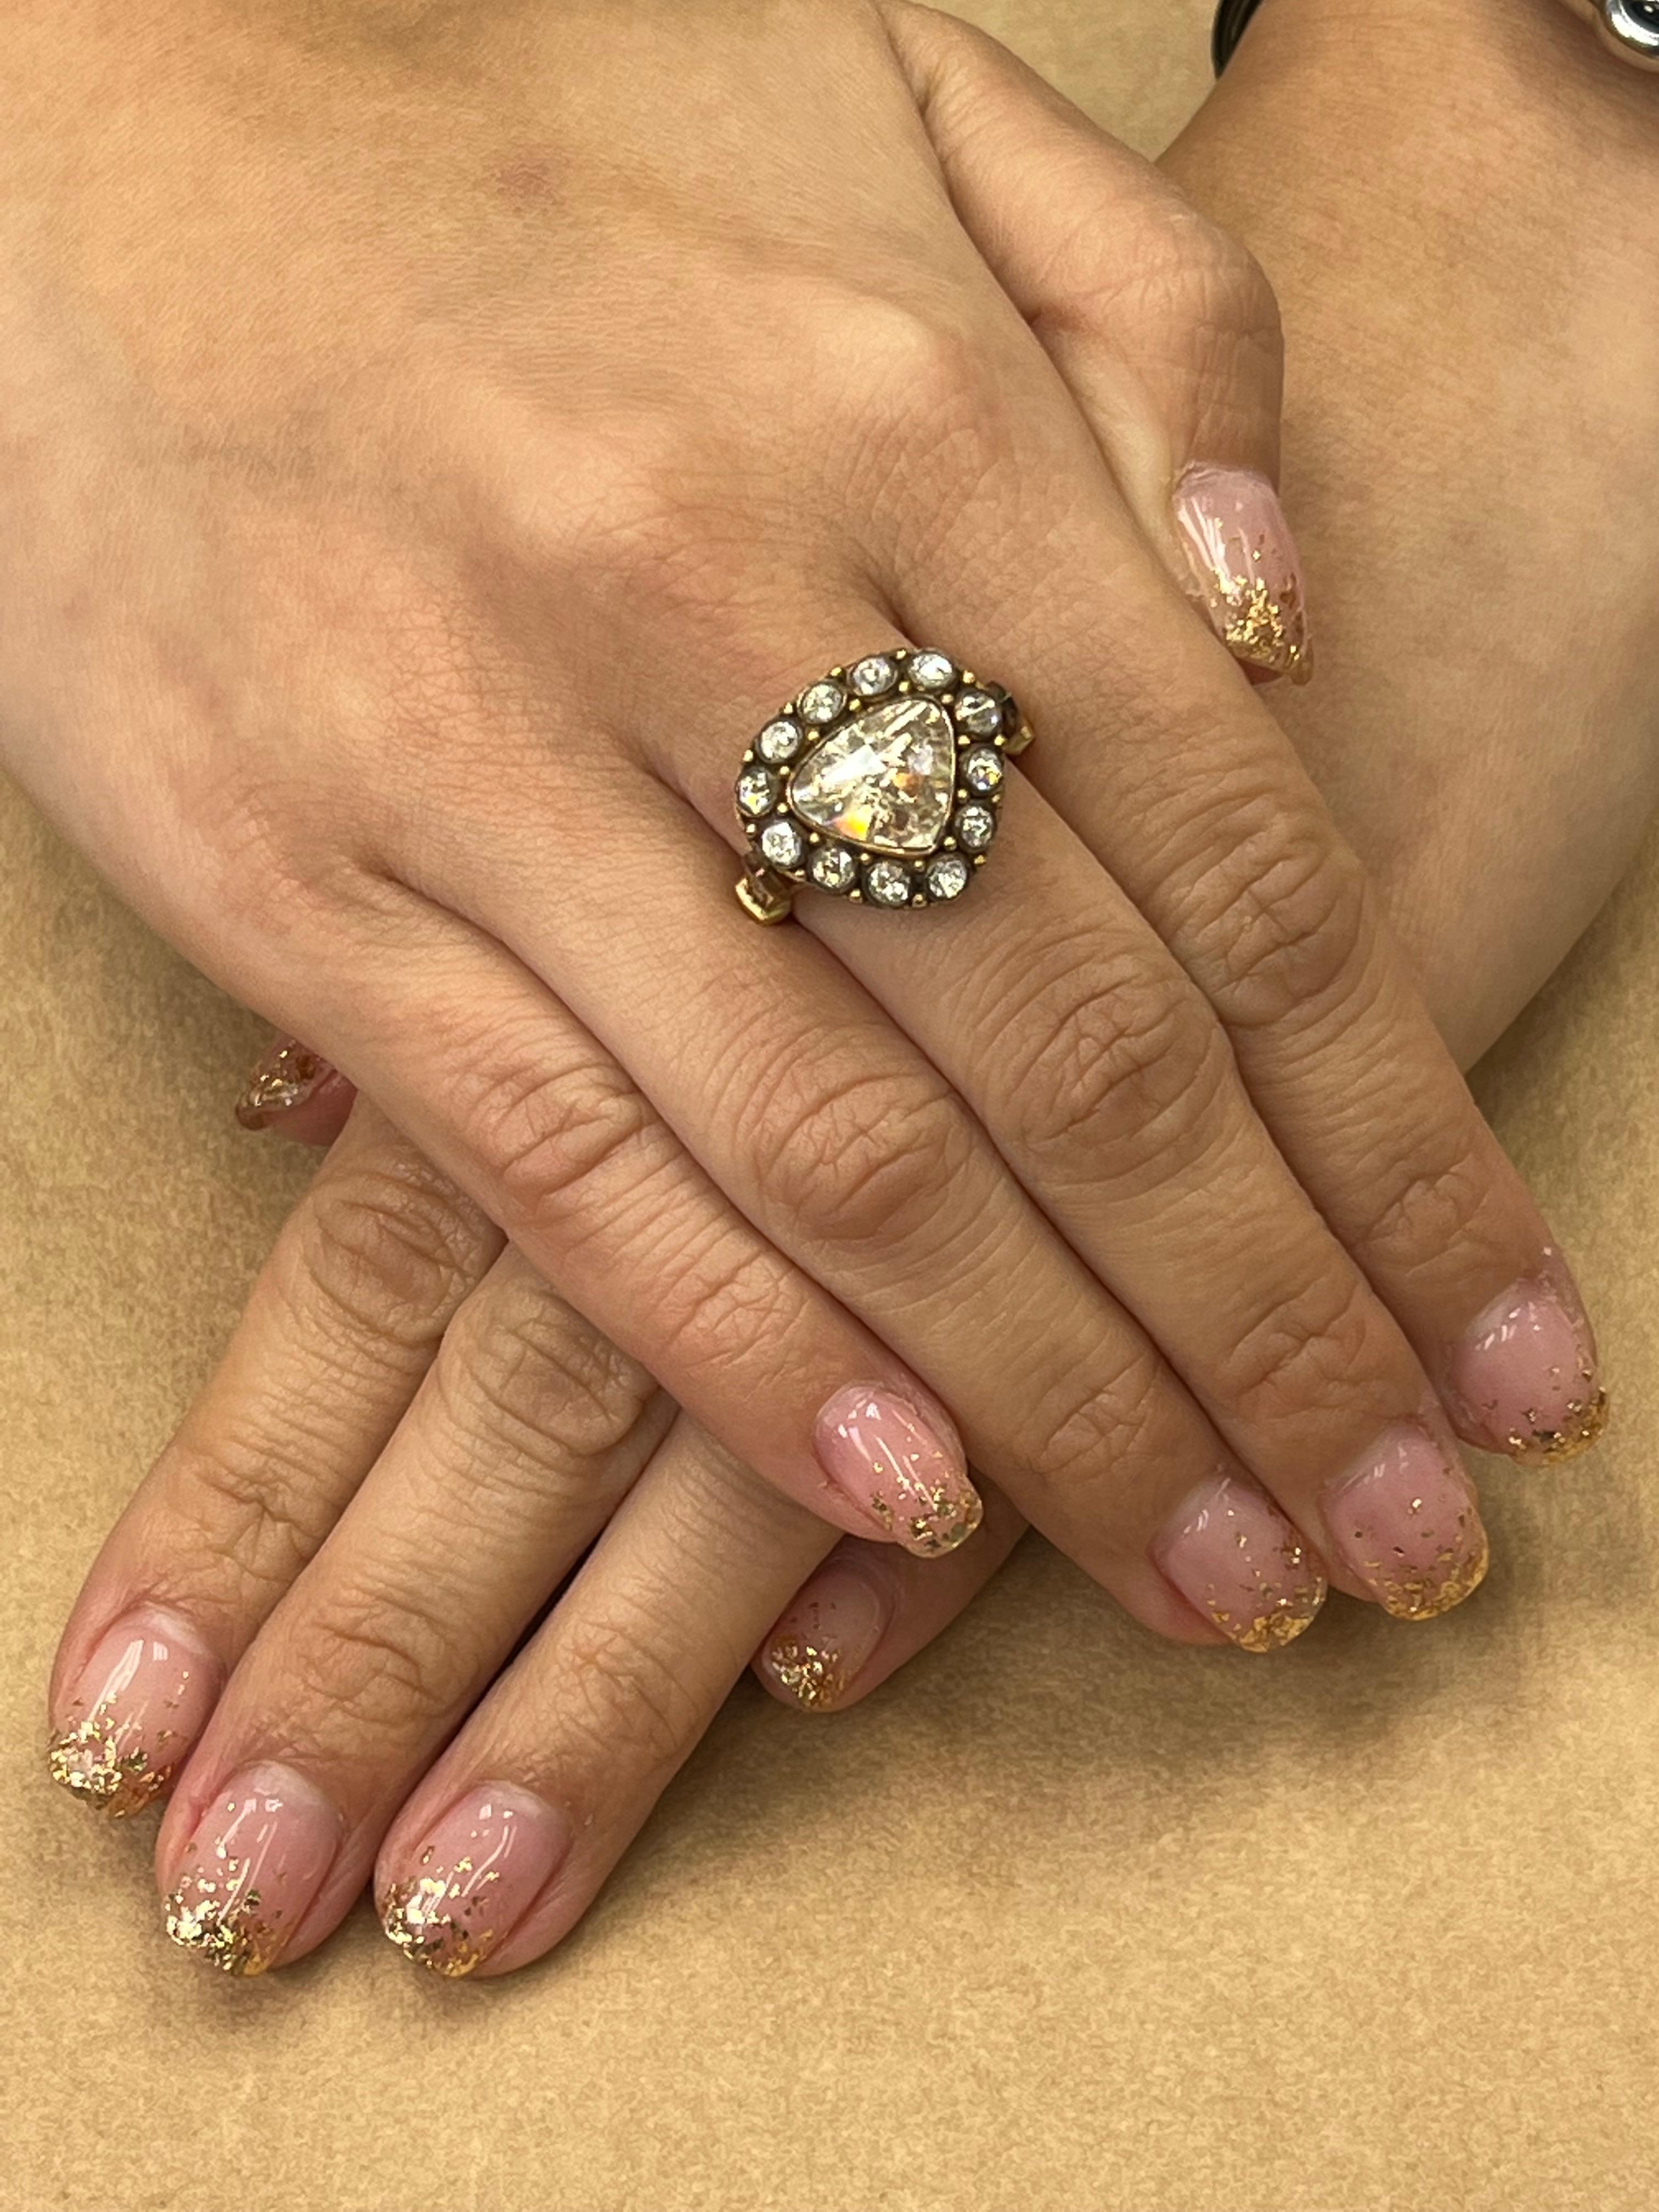 Please check out the HD video. This is a newly made ring using older materials. This ring has a great antique feel and look. The ring is set in 18k rose / yellow gold and diamonds. The center triangle rose cut diamond is about 2.05 Cts, there are an